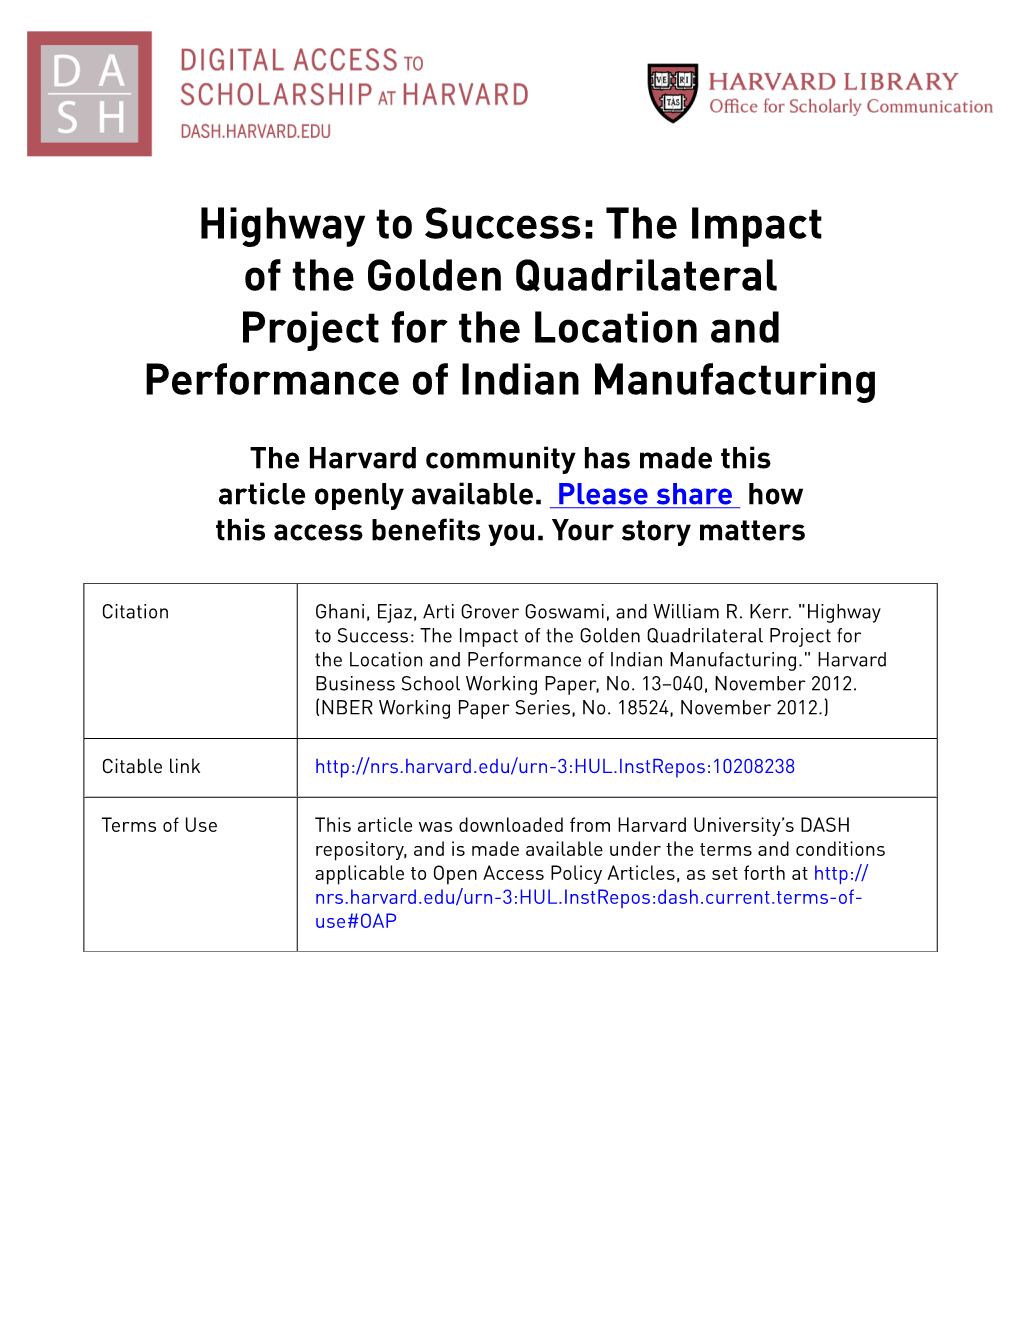 Highway to Success: the Impact of the Golden Quadrilateral Project for the Location and Performance of Indian Manufacturing